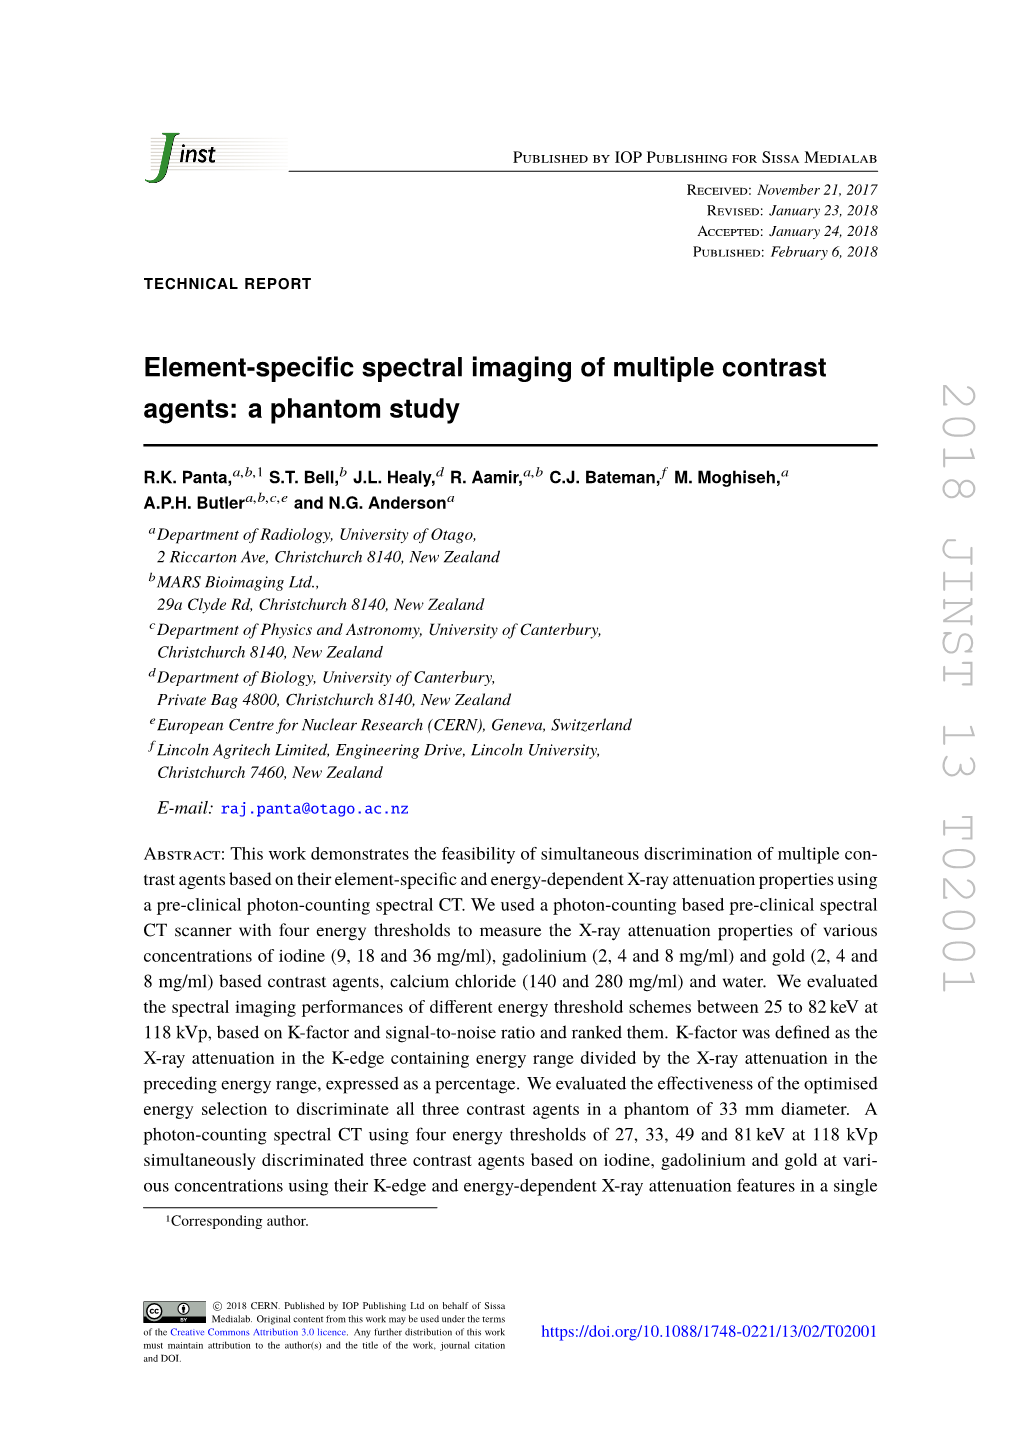 Element-Specific Spectral Imaging of Multiple Contrast Agents: a Phantom